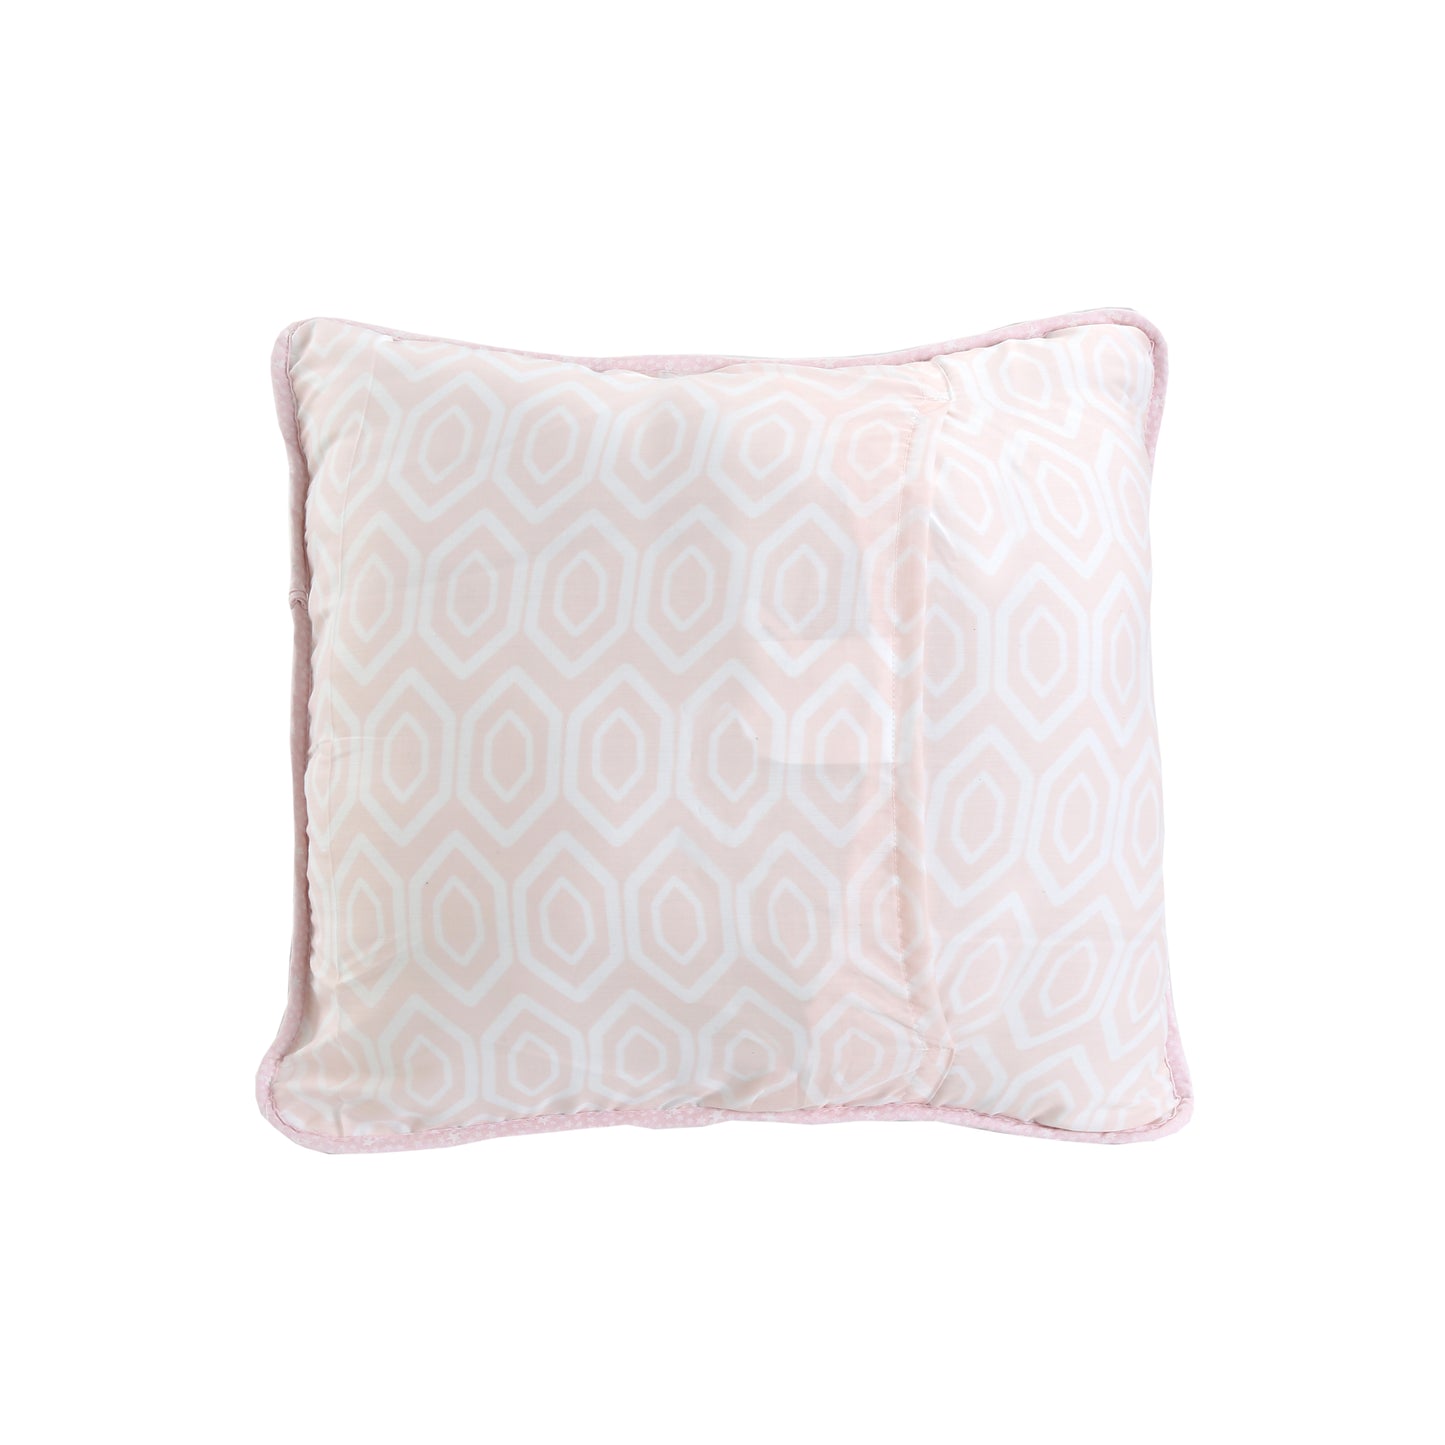 Pretty in Pink Girly Ruffle Star Stripped Square Décor Throw Pillow